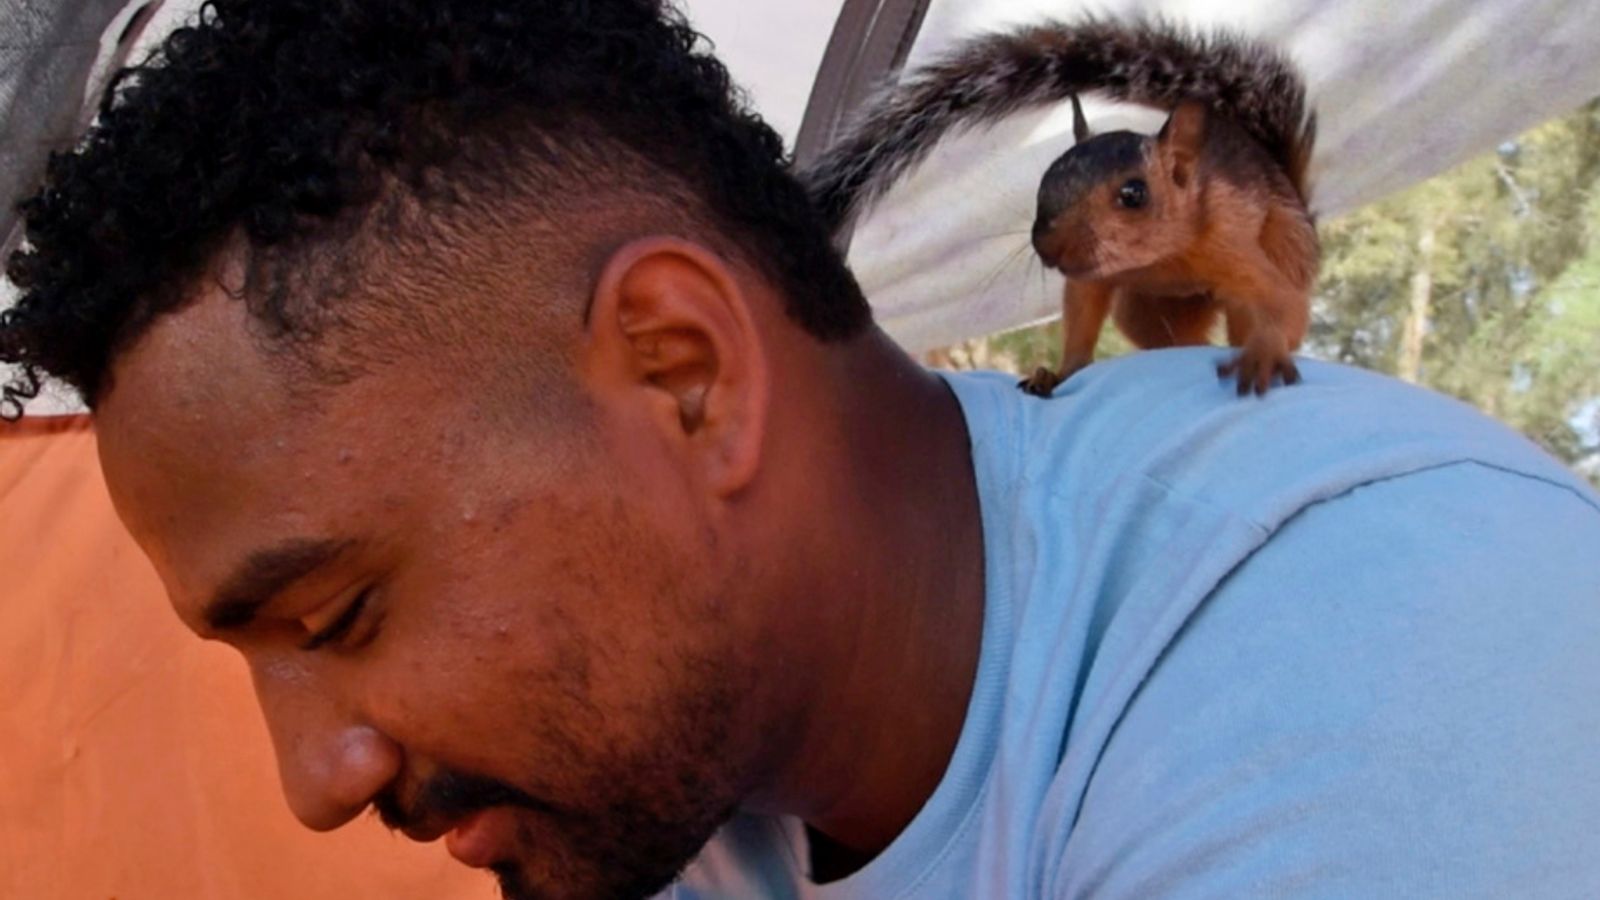 Man fleeing Venezuela faces having to say goodbye to pet squirrel after 3,000-mile journey to border